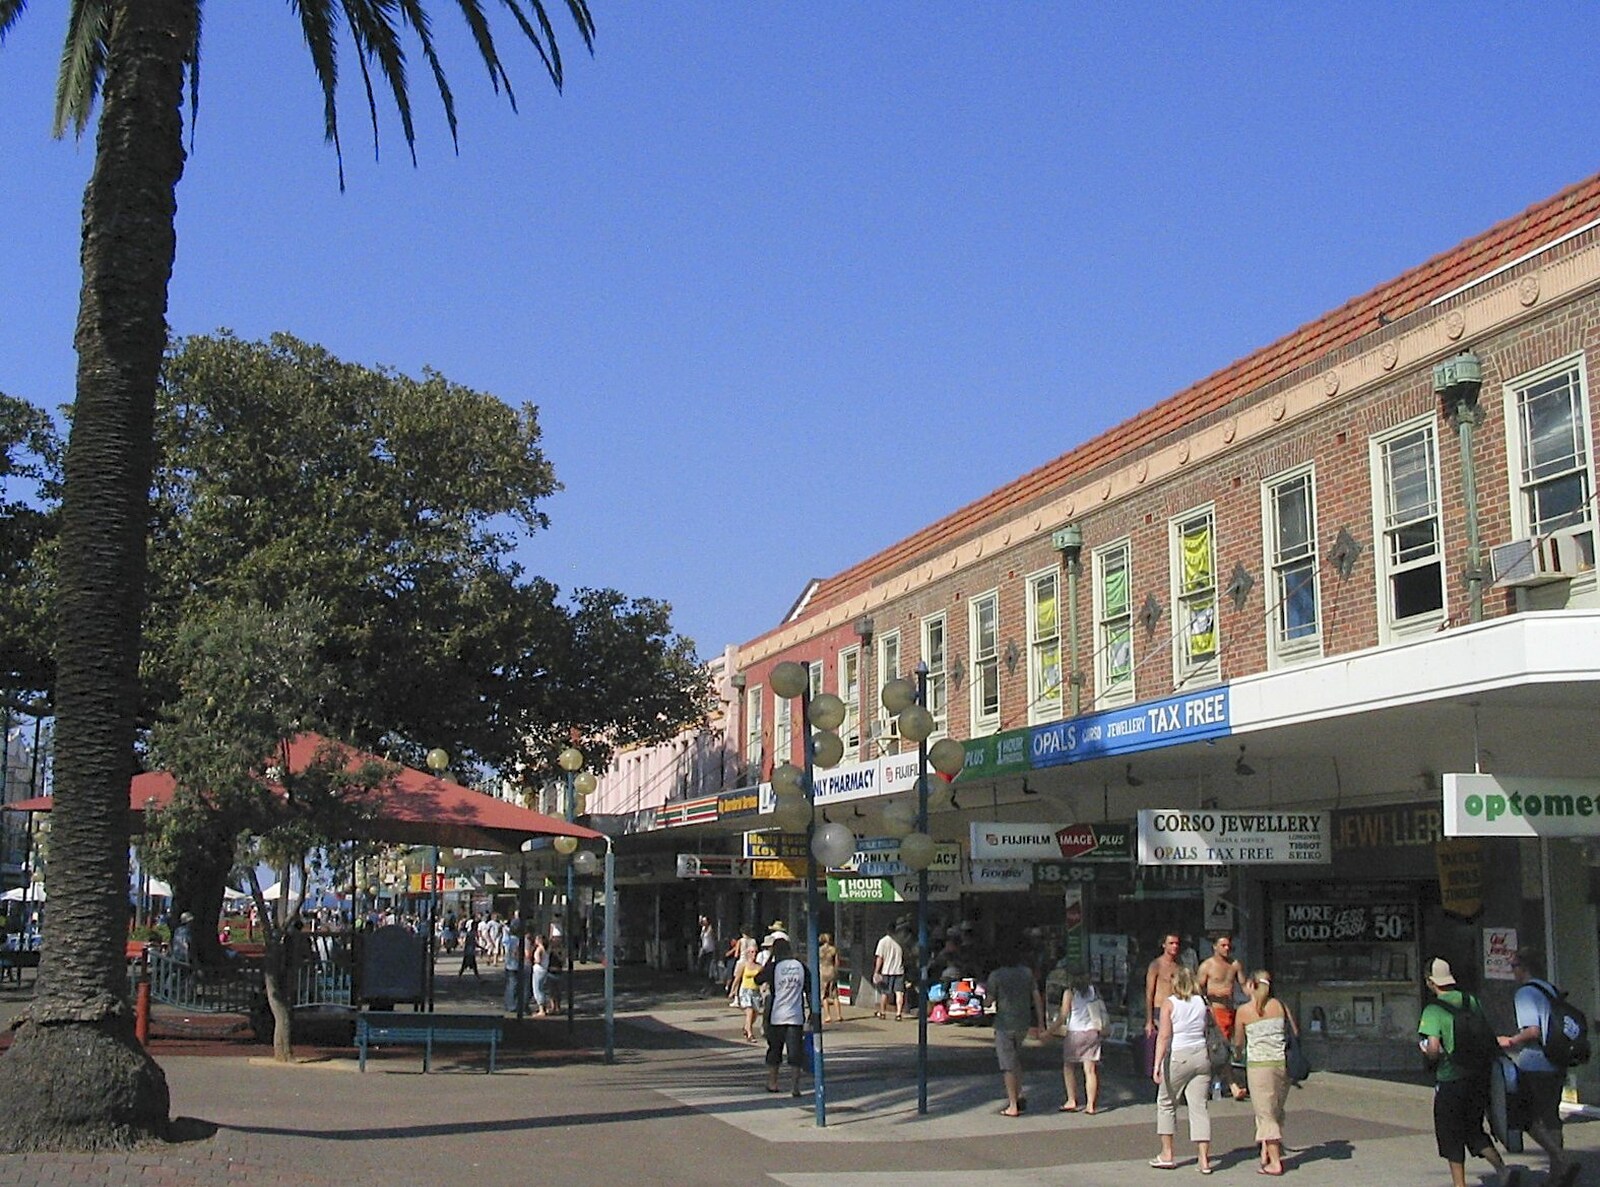 Manly shops from Sydney, New South Wales, Australia - 10th October 2004